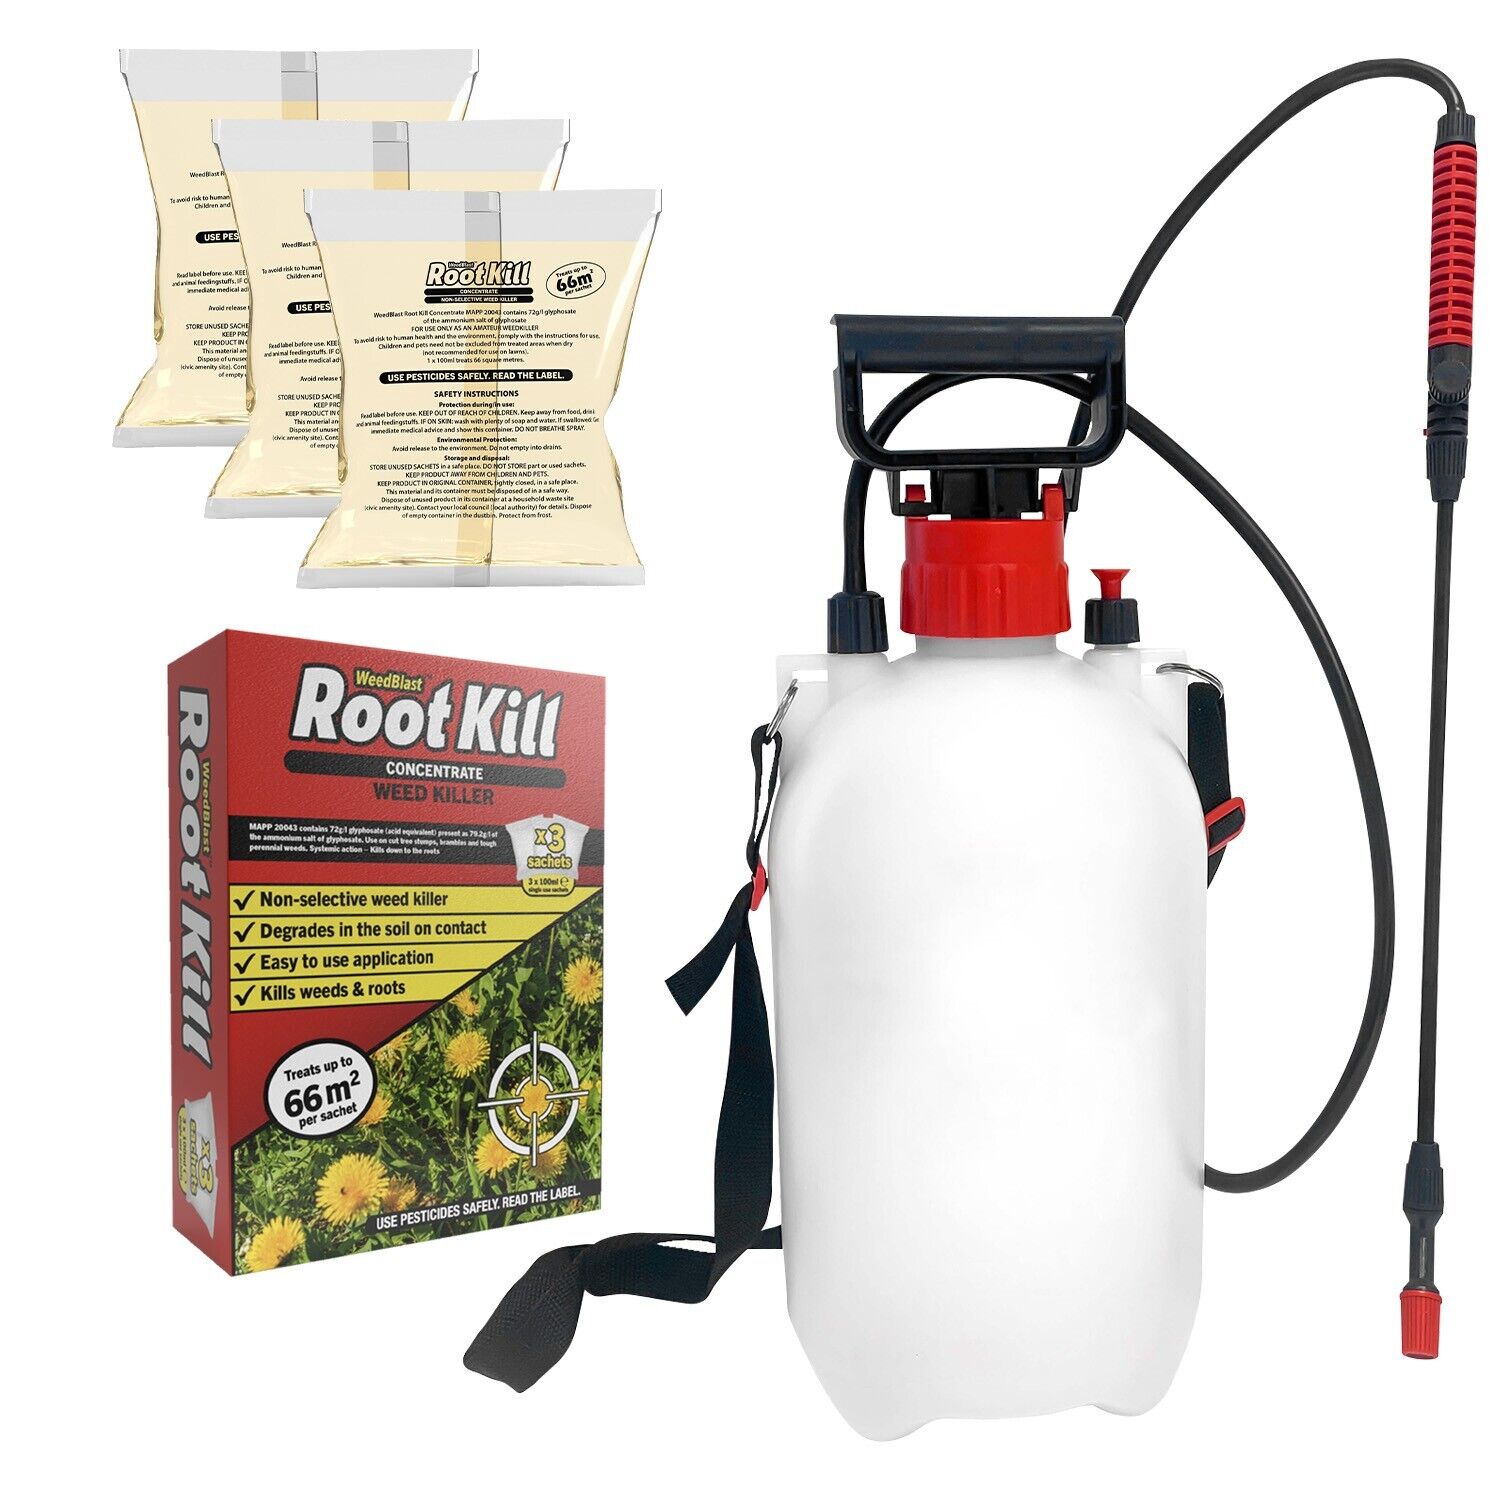 Weedblast Rootkill Concentrated Weedkiller 3 x 100 Sachets boxed with 5L Garden Sprayer